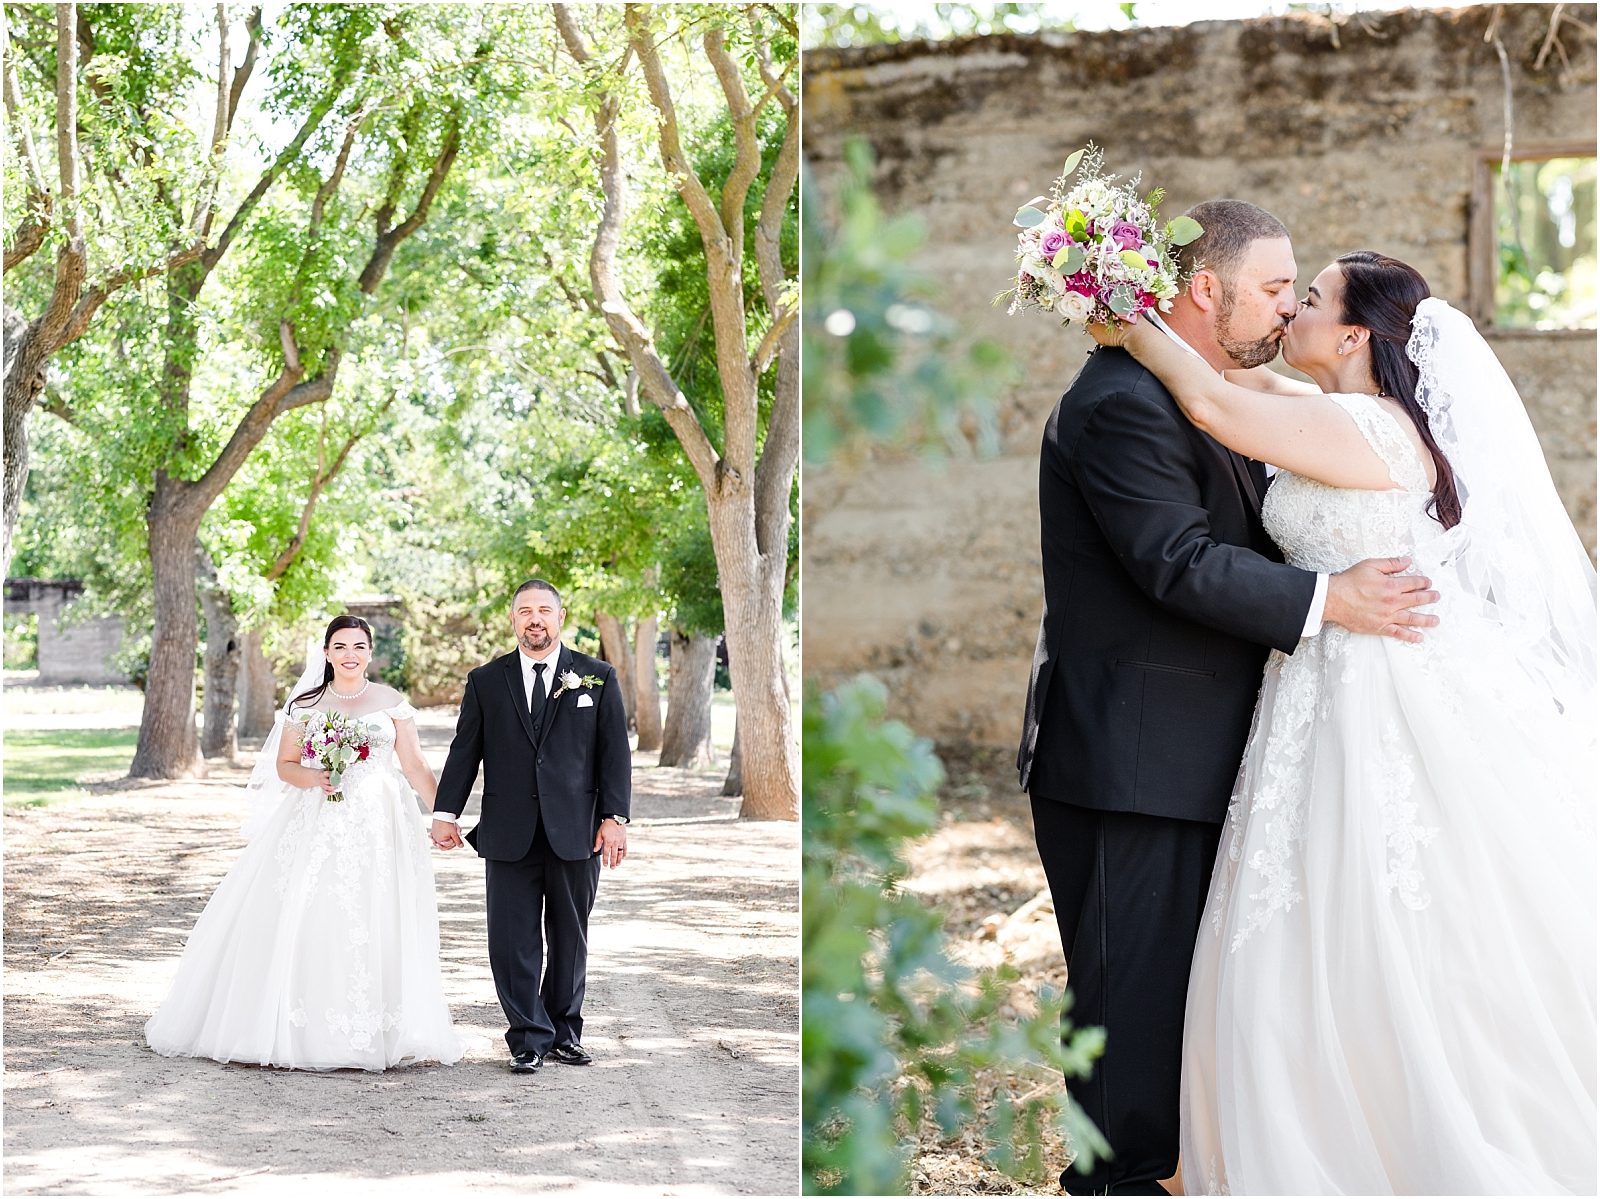 Livermore, CA wedding day portraits at Ravenswood Historic Site. Bride and groom hold hands and kiss.